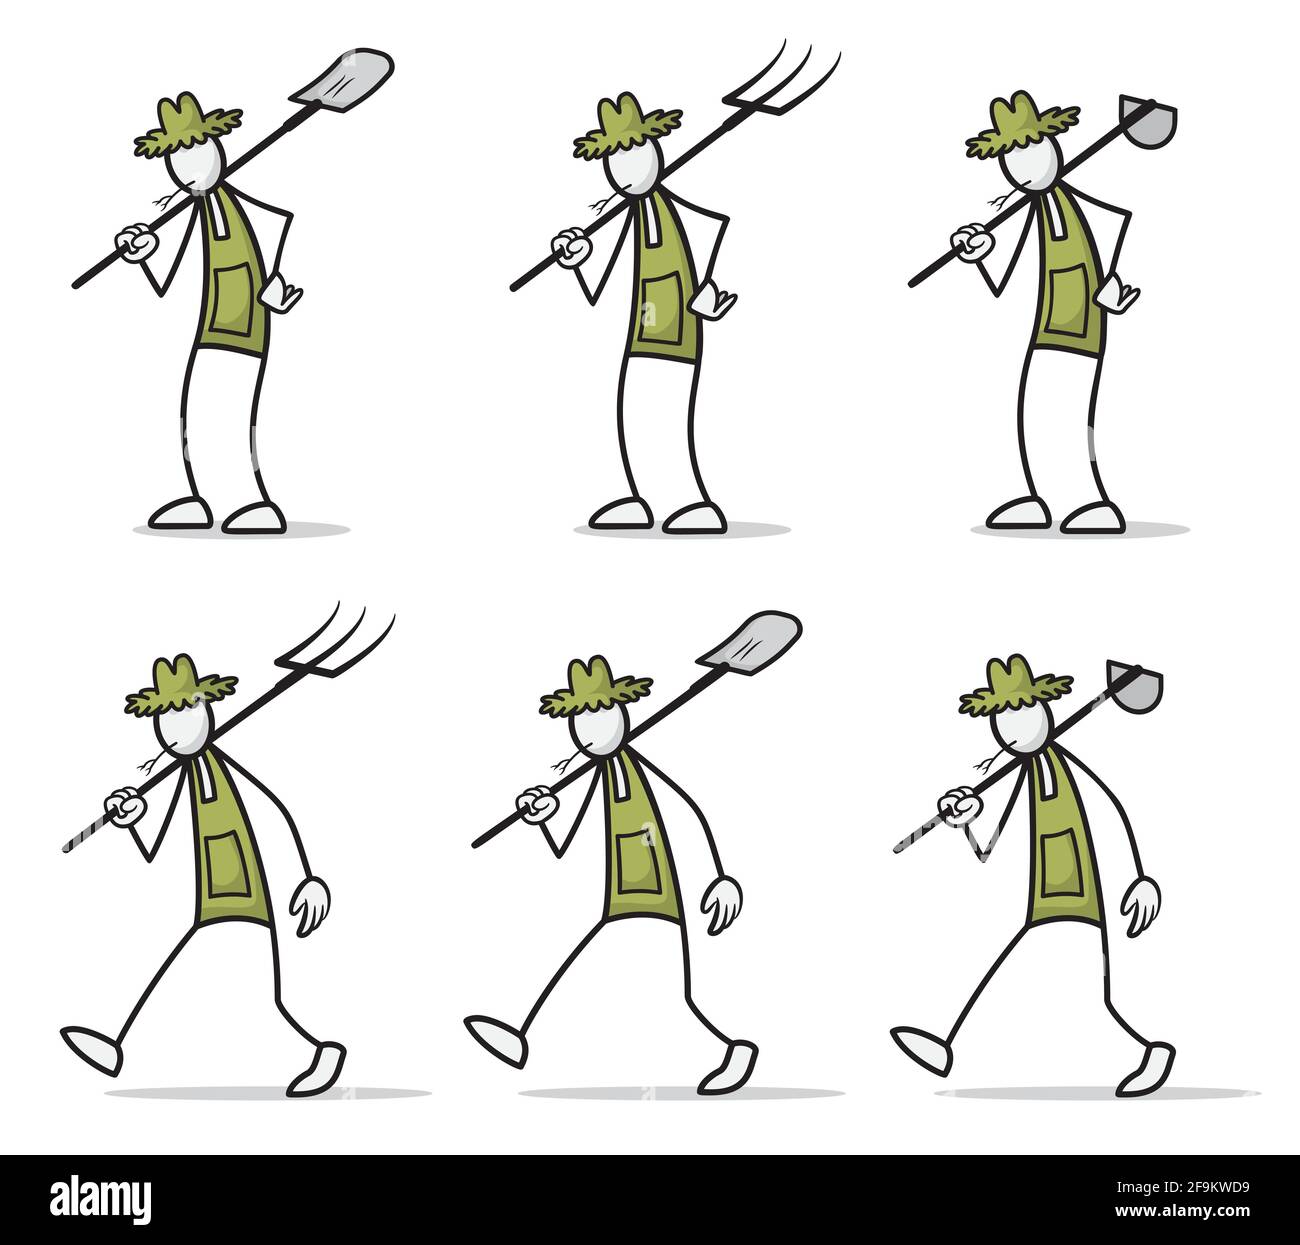 Set of farmer at outdoor activities in different poses. Print vector illustration Stock Vector